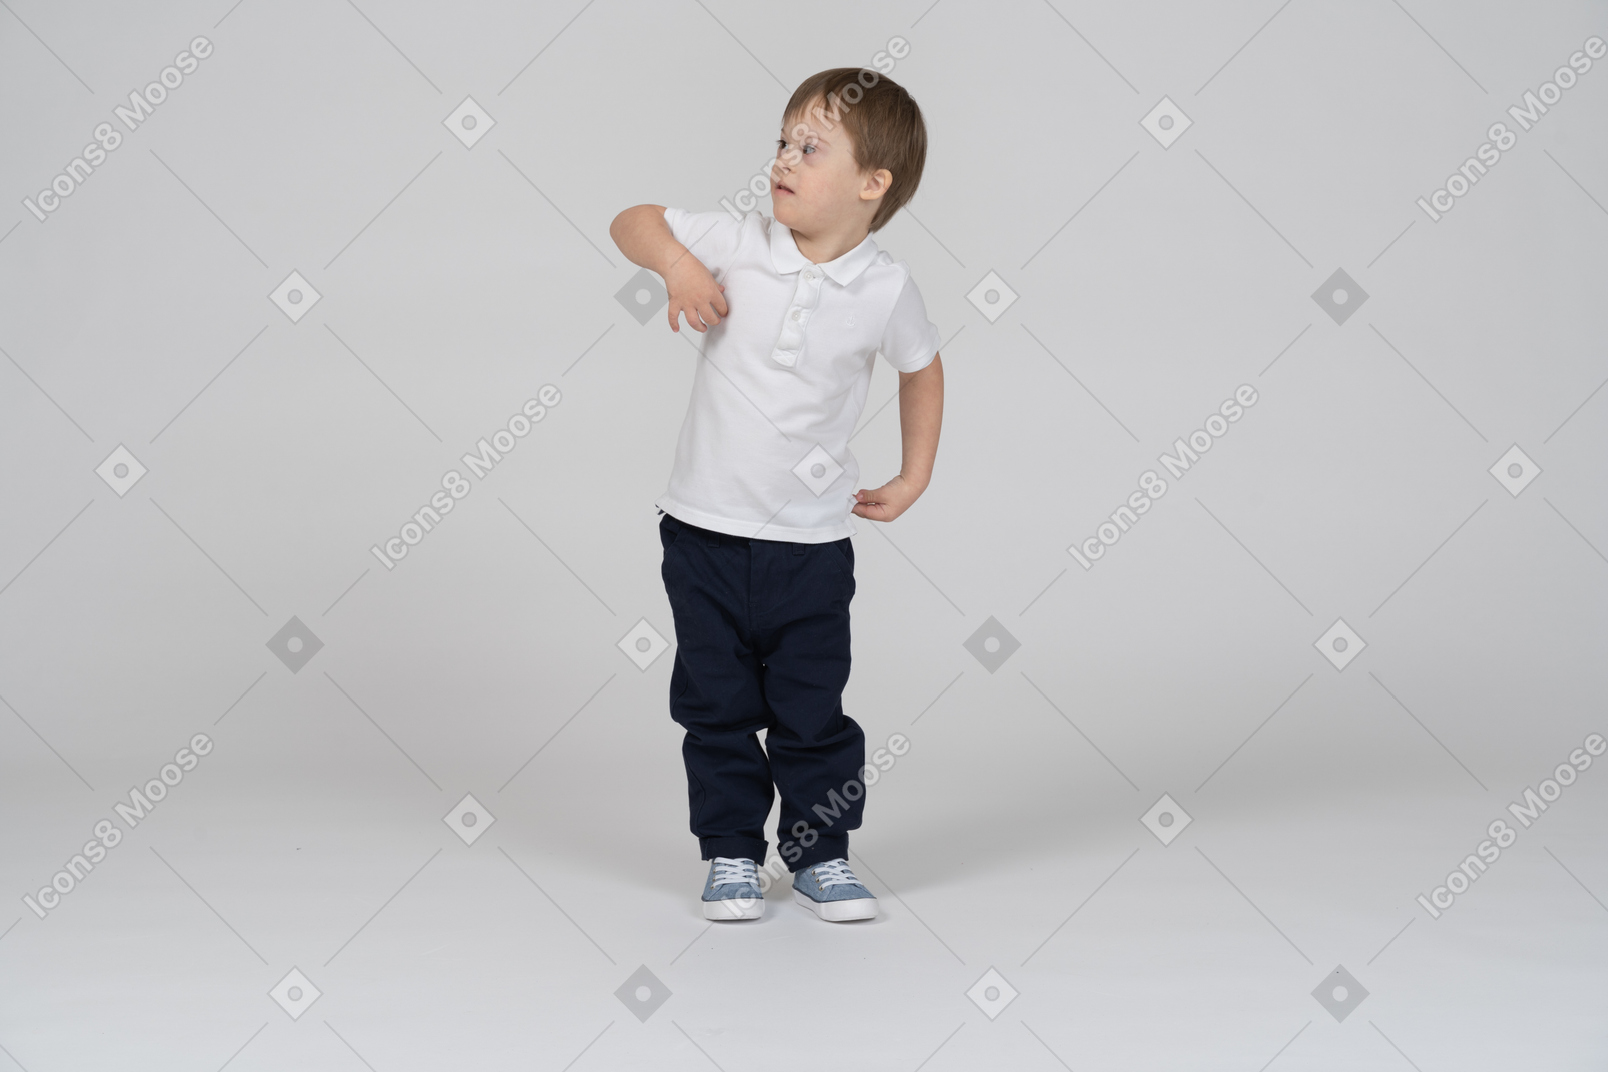 Front view of little boy standing and touching his chest